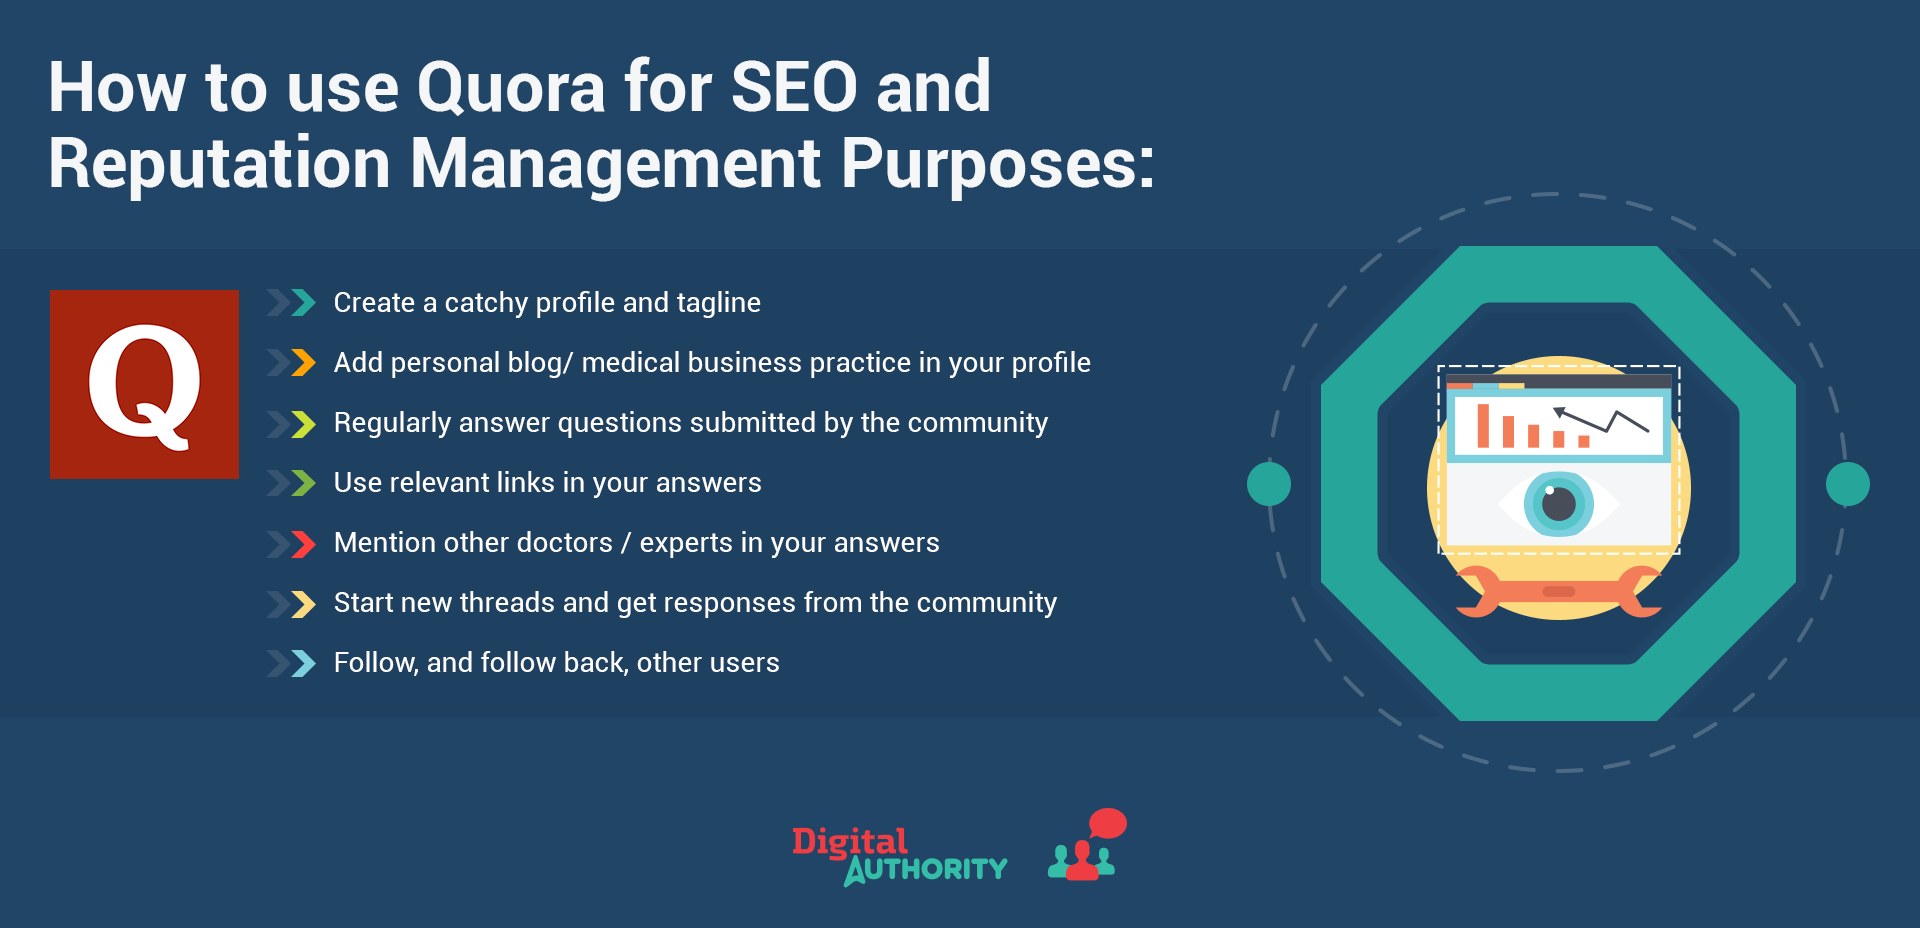 Graphic explaining how to use Quora for SEO and Reputation Management Purposes